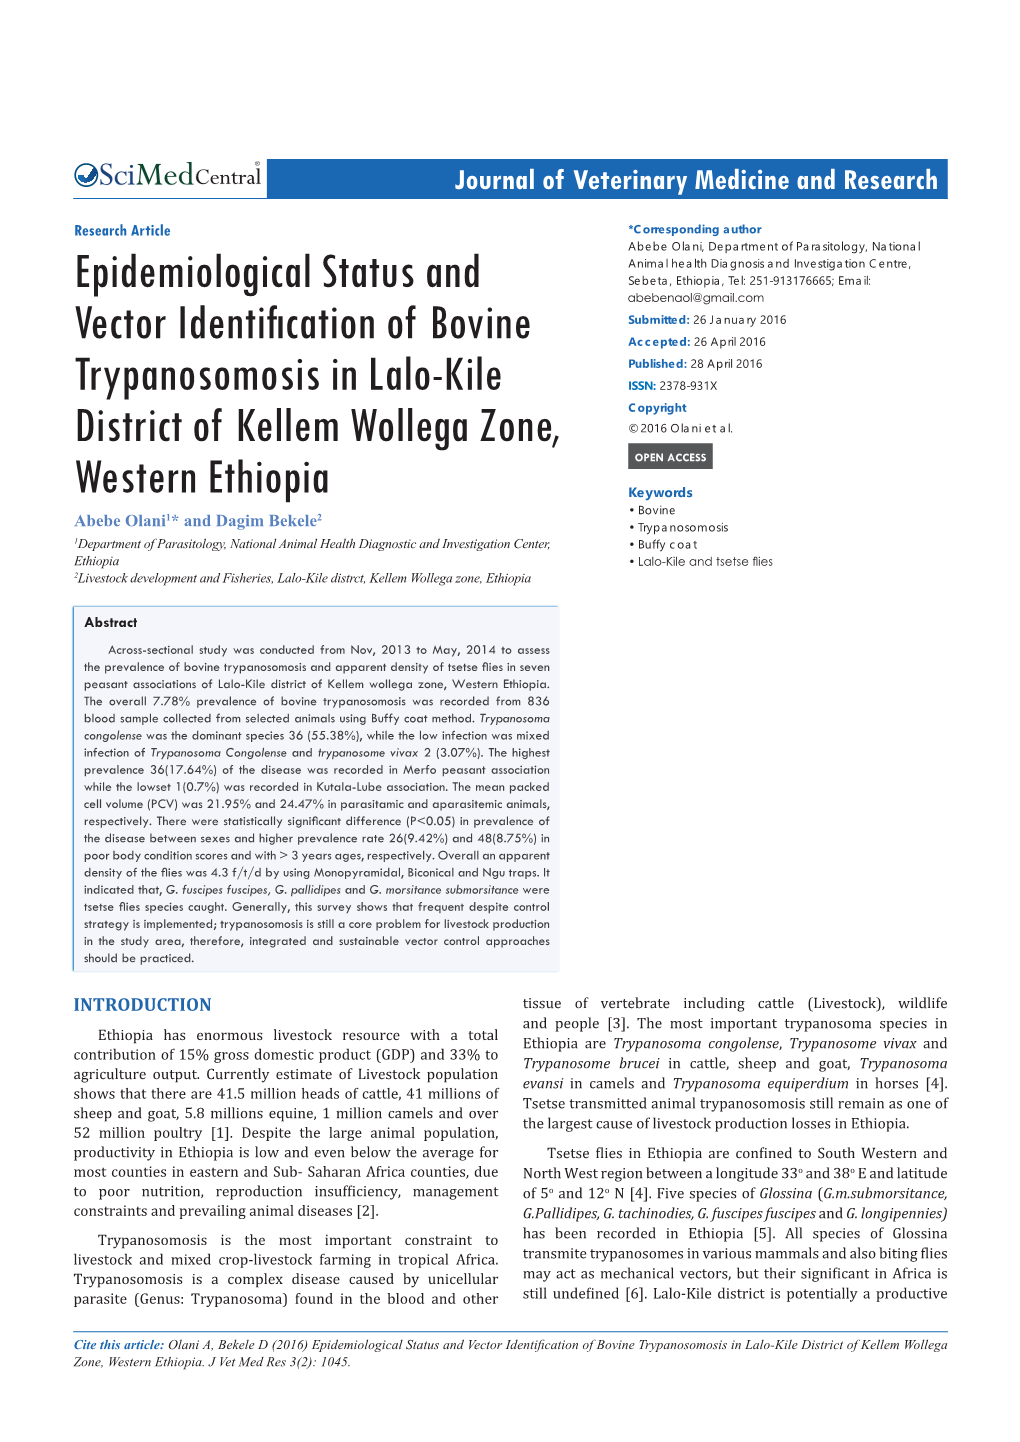 Epidemiological Status and Vector Identification of Bovine Trypanosomosis in Lalo-Kile District of Kellem Wollega Zone, Western Ethiopia